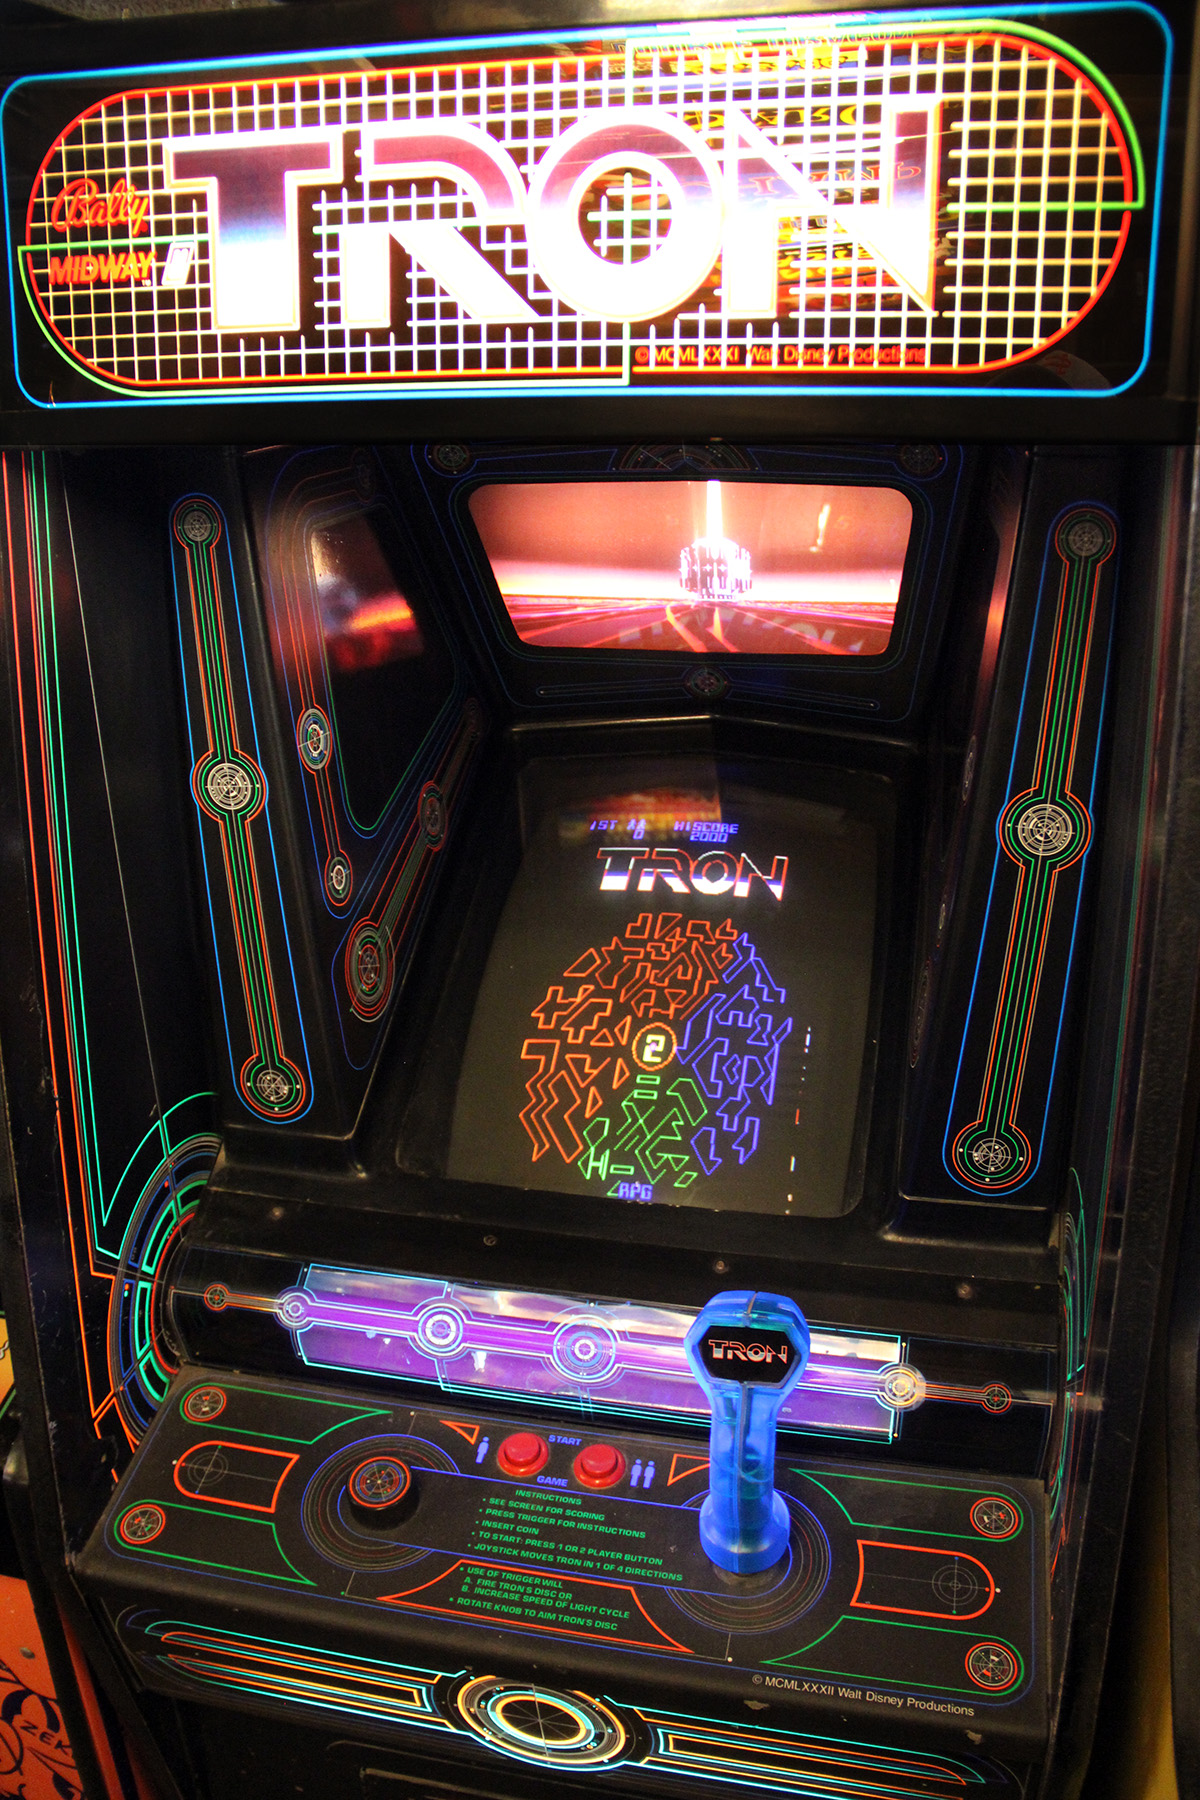 The game version of Tron came out in 1982, the same year as the film.